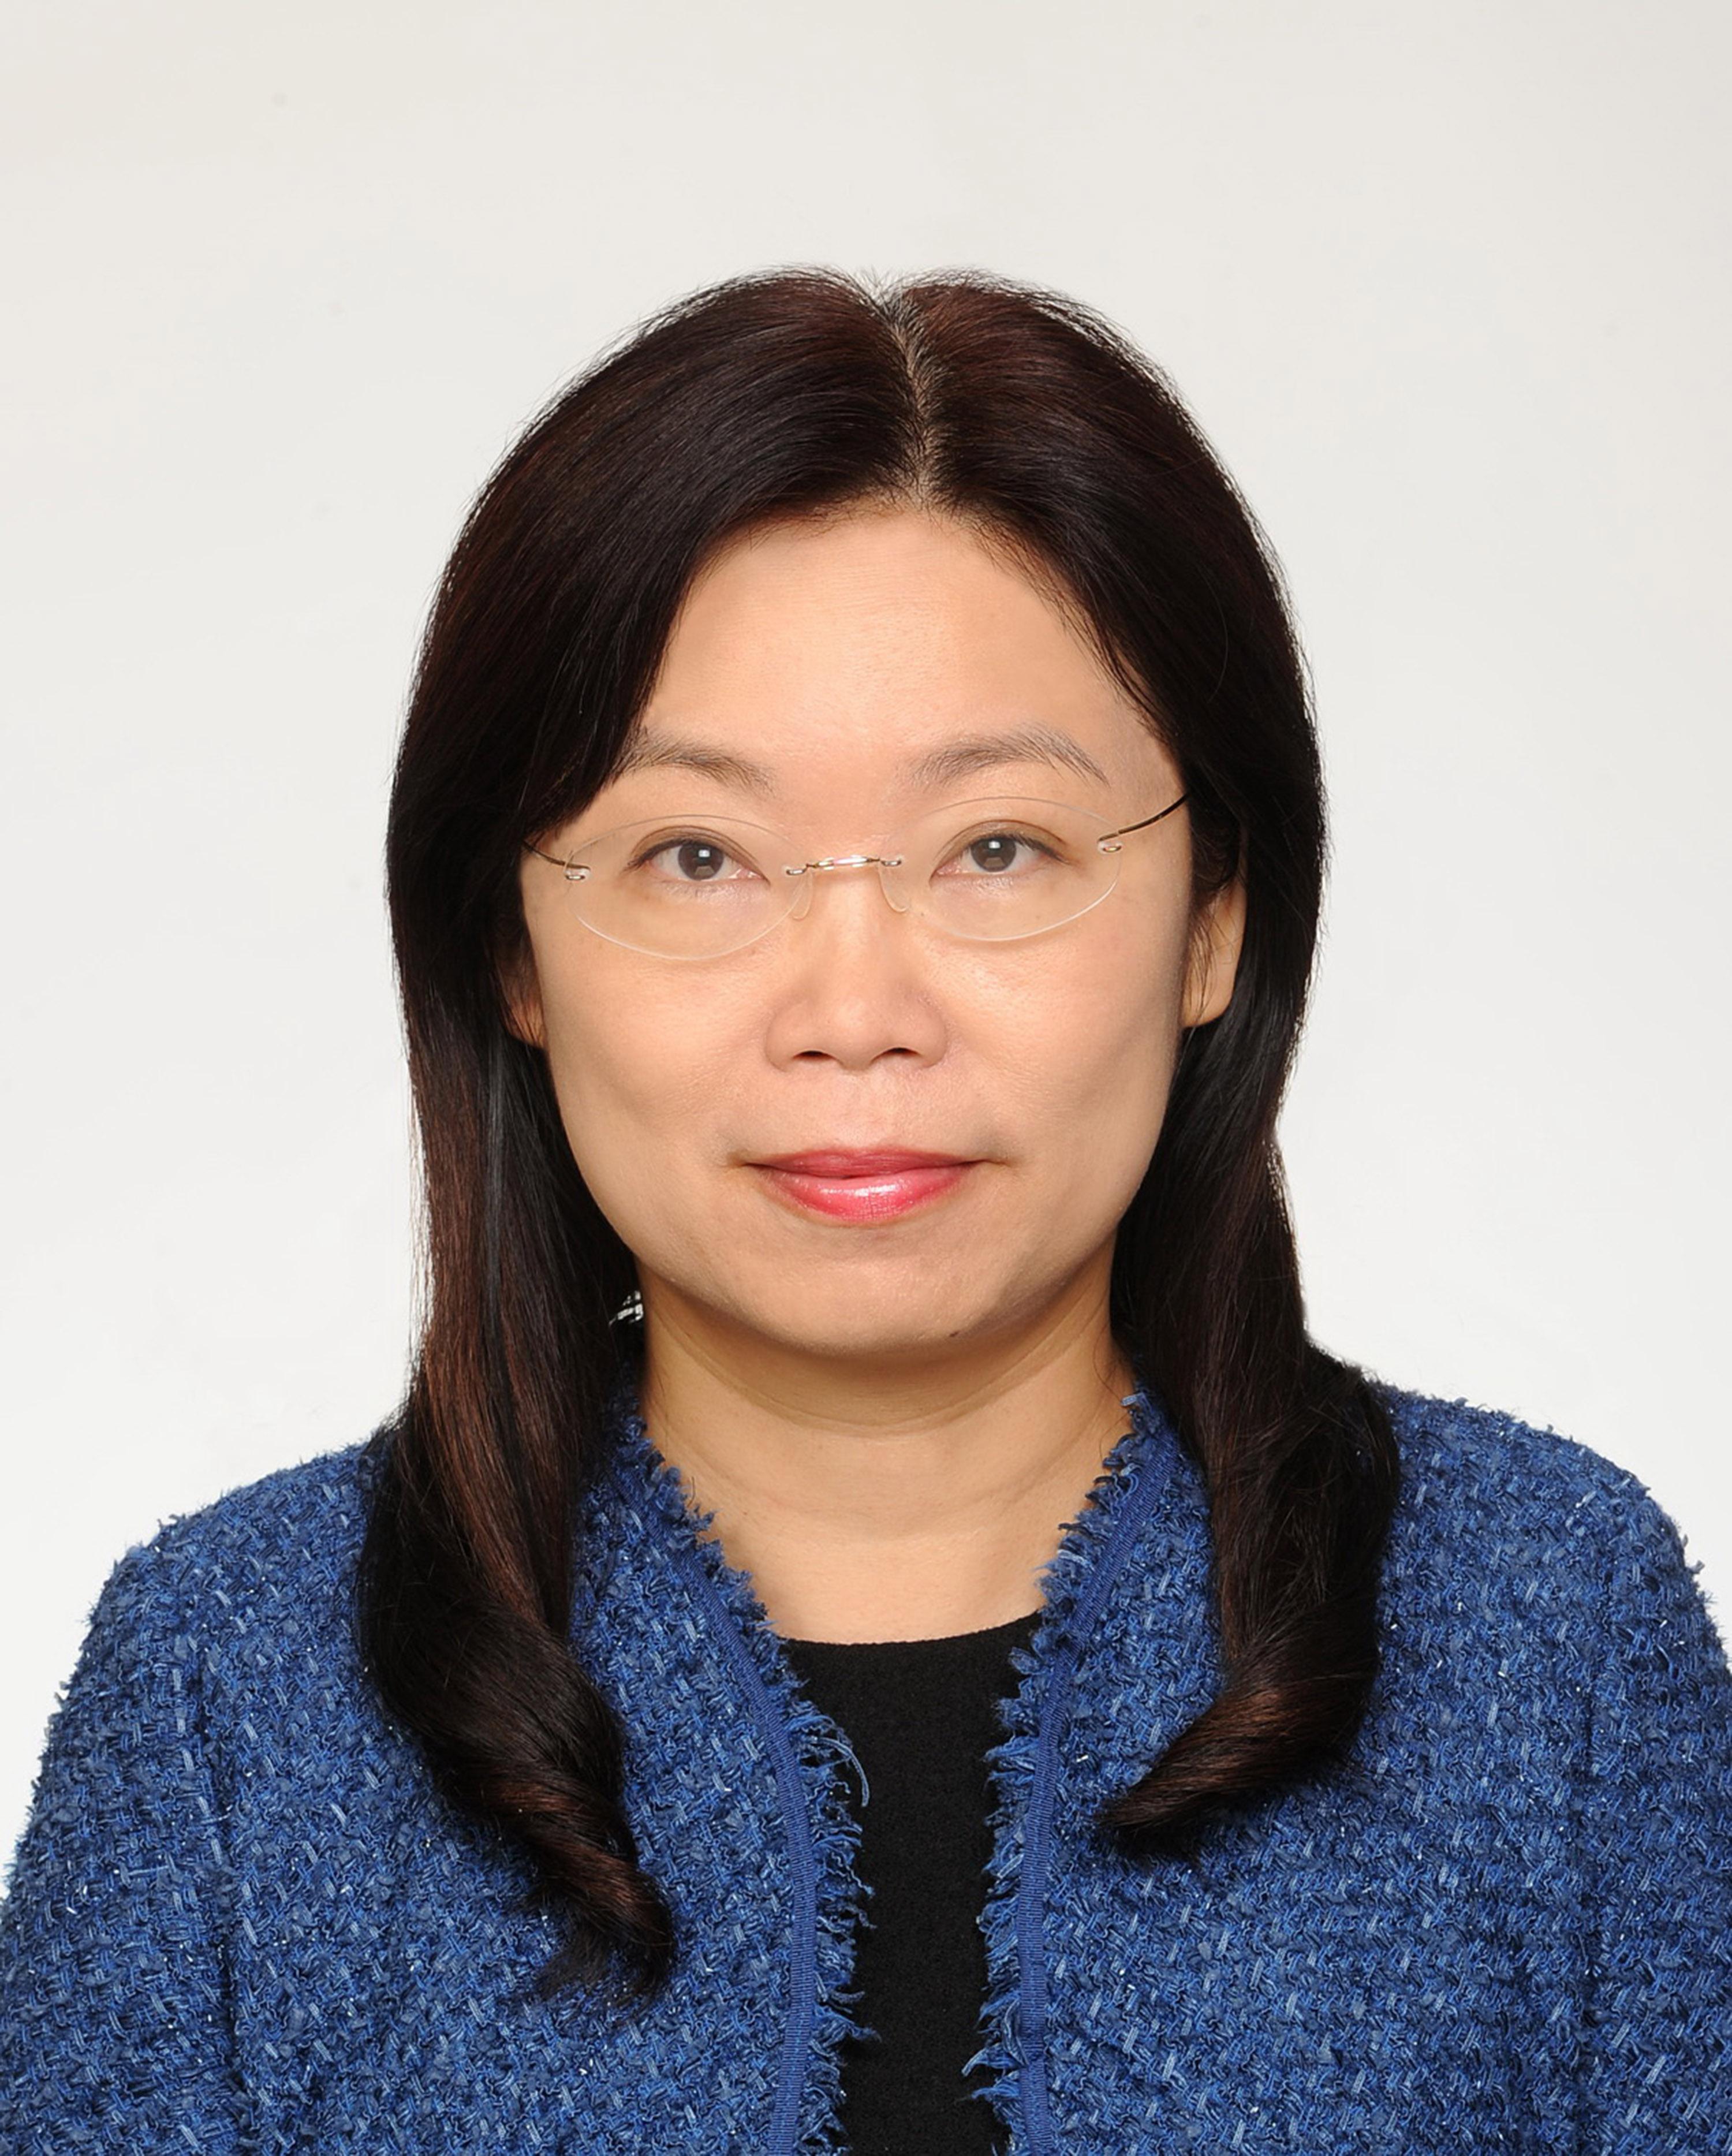 Ms Gracie Foo Siu-wai, Director of Administration and Development of the Department of Justice, will assume the post of Permanent Secretary for Constitutional and Mainland Affairs on July 15, 2022.